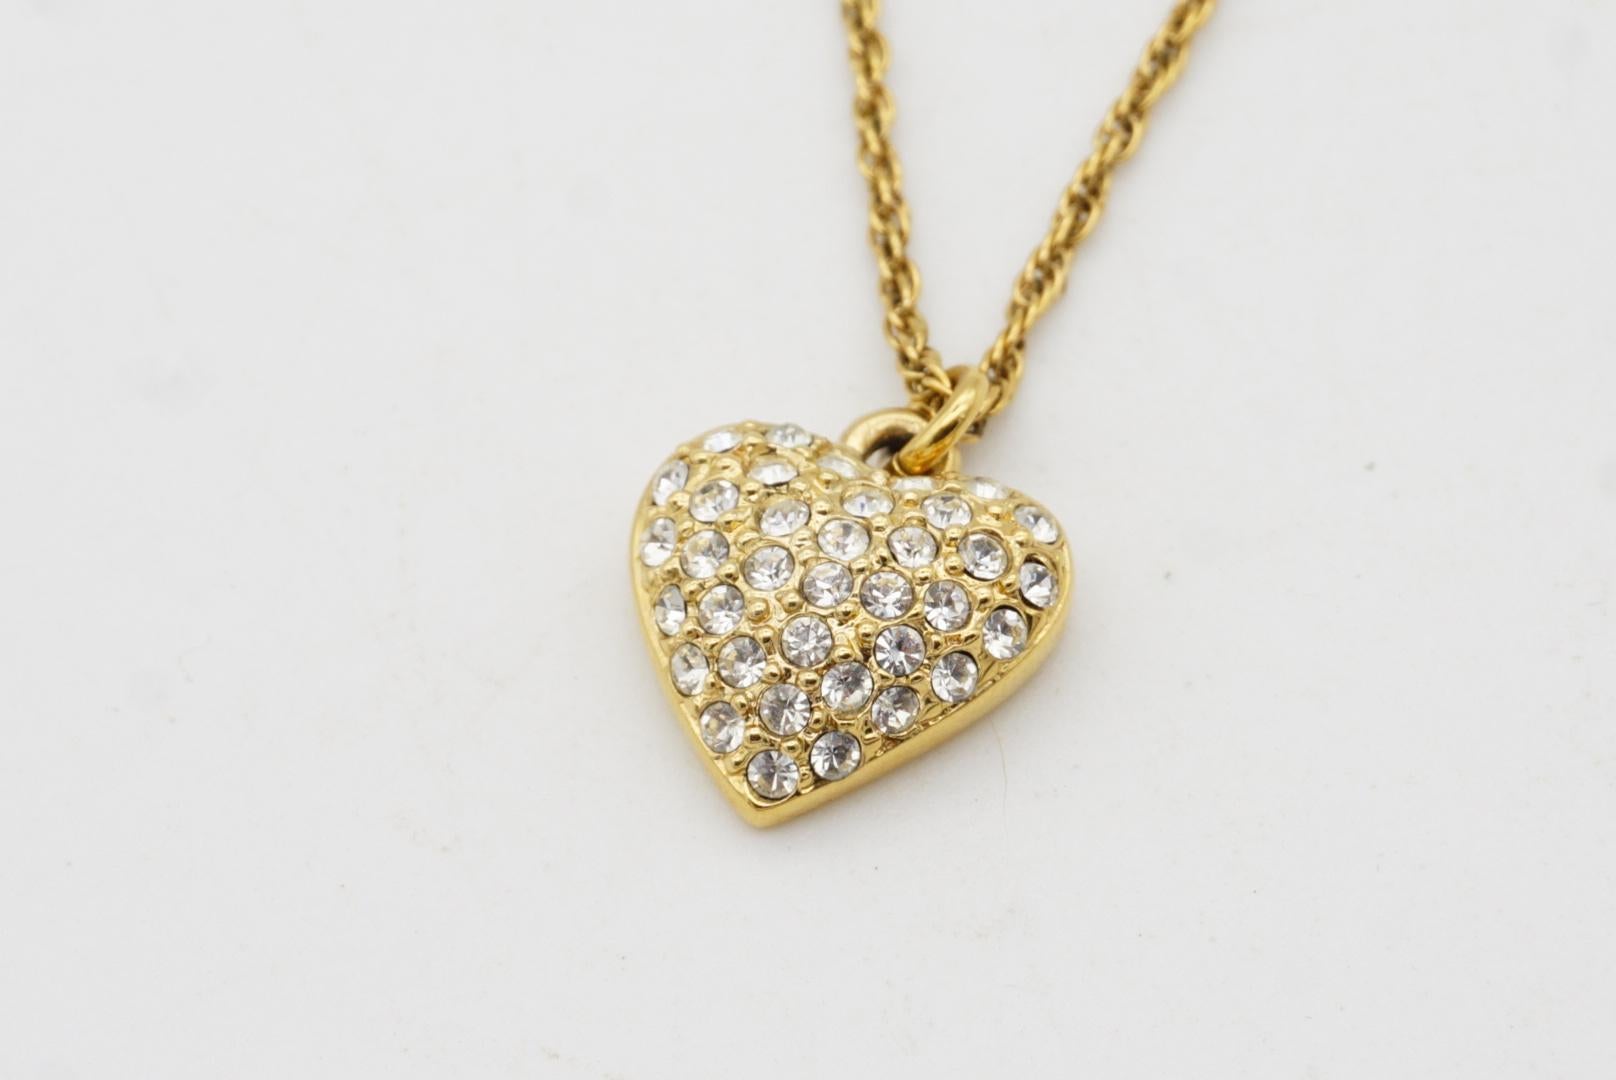 Christian Dior Vintage 1990s Shining Crystals Heart Love Pendant Gold Necklace For Sale 5